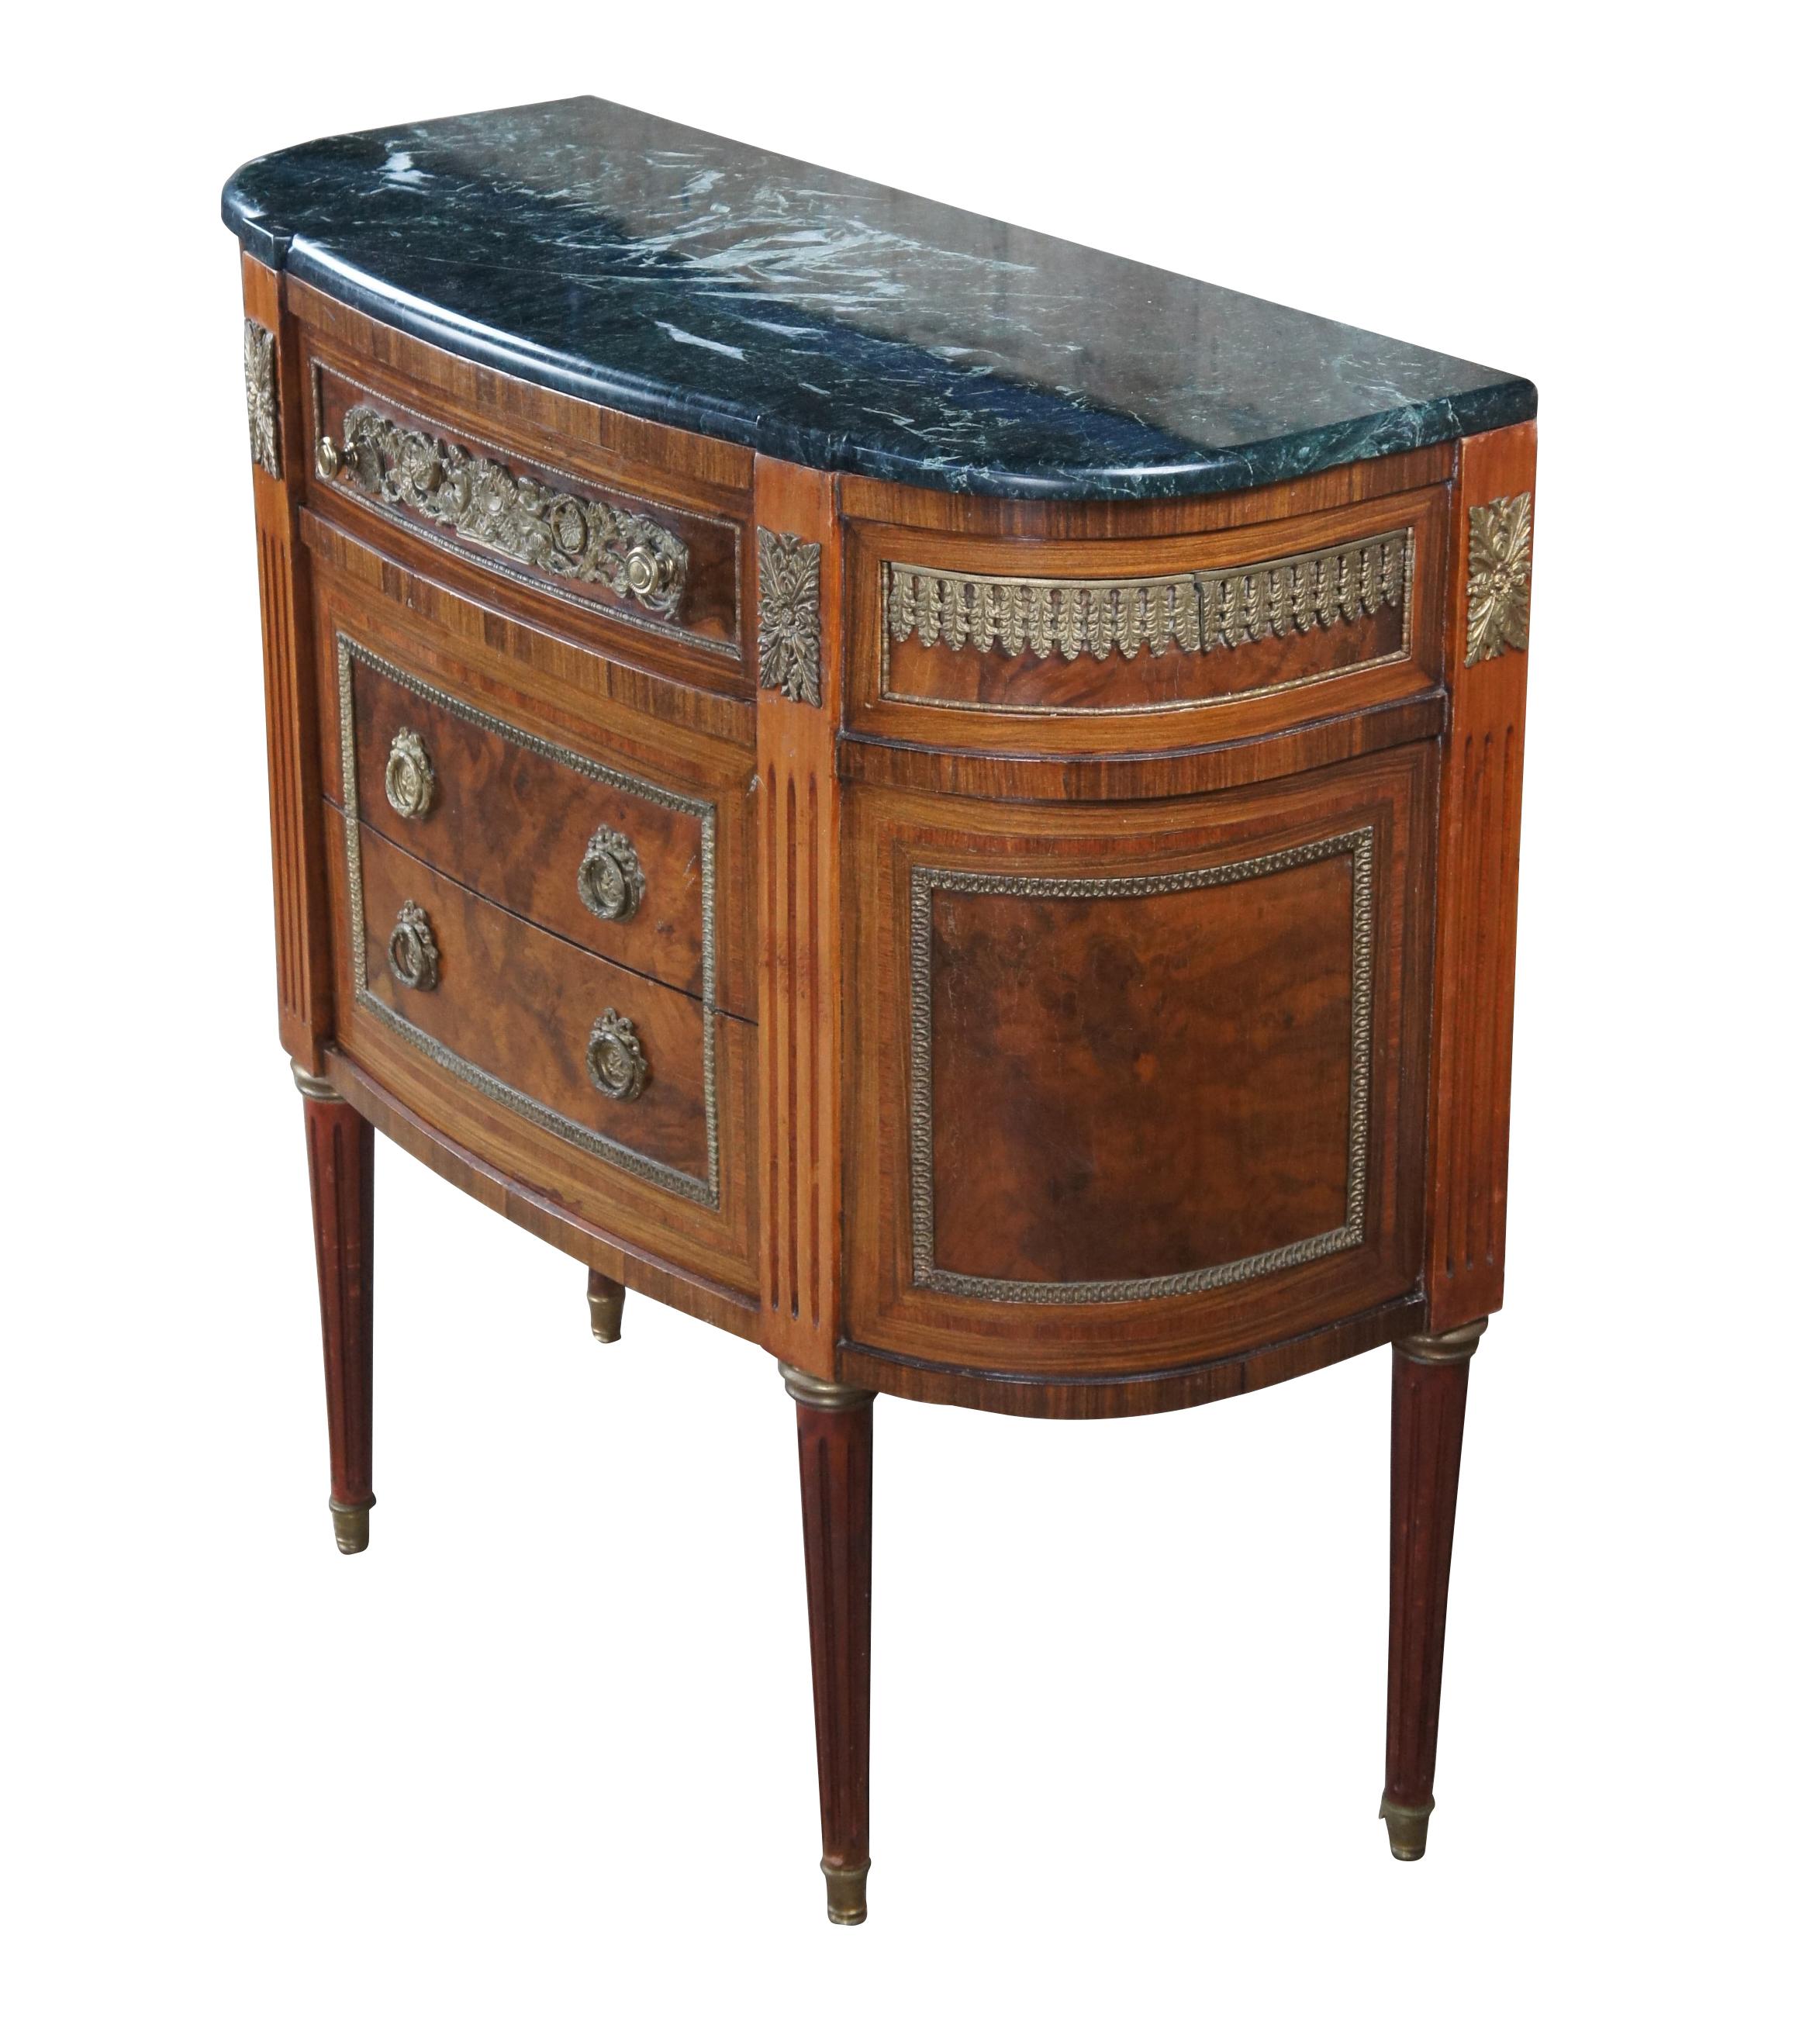 Vintage French Louis XVI style commode, dresser or console, circa 1970s.  Made of mahogany featuring half round demilune form with ornate brass trim, notched marble top, three drawers, fluted accents and tapered legs capped with brass feet.  Made in